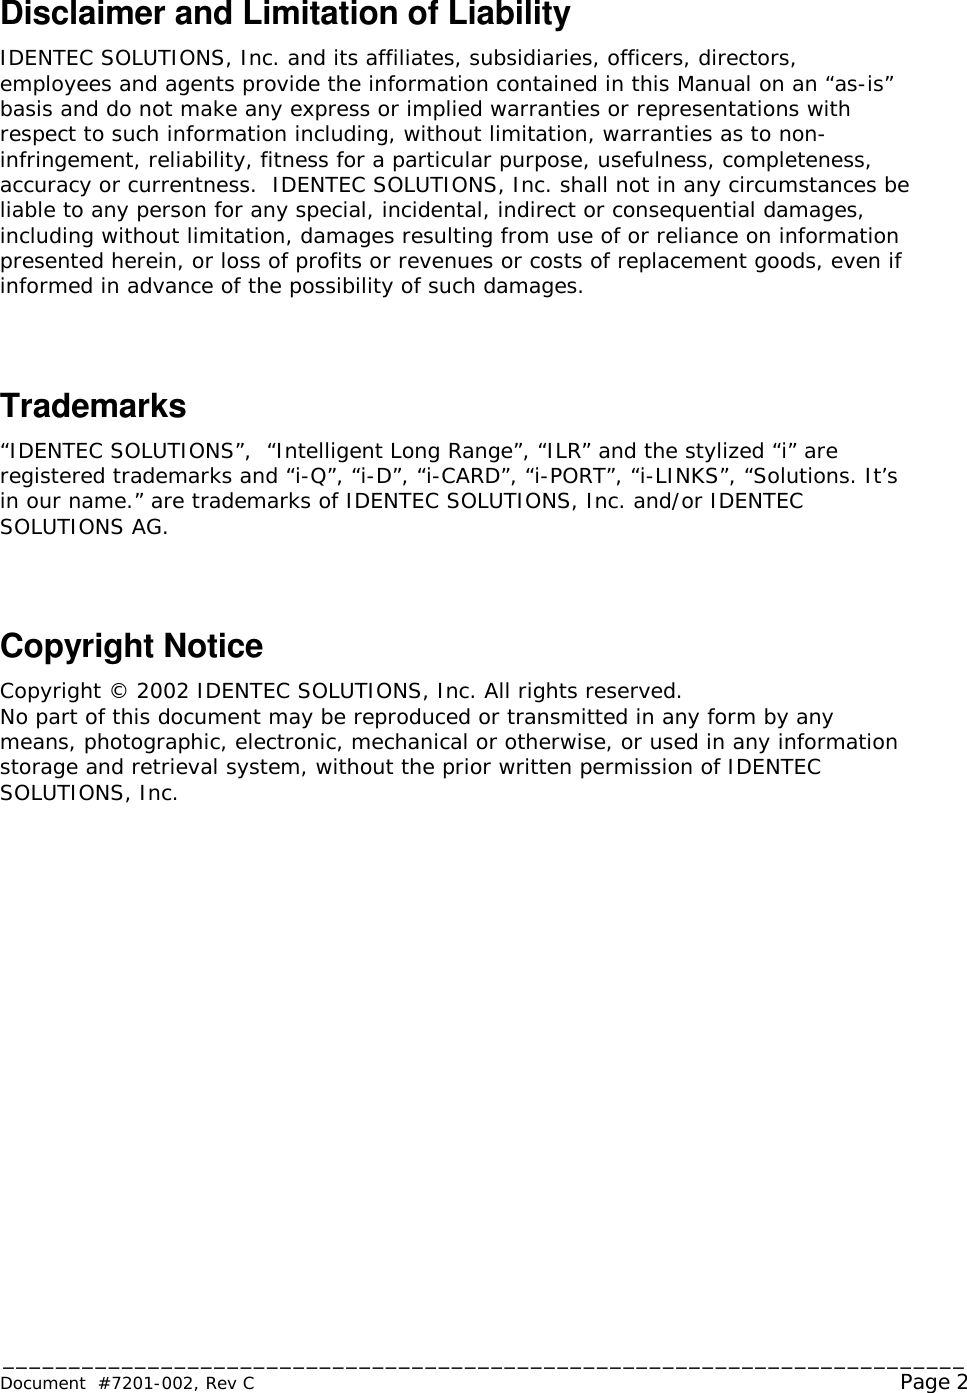 _________________________________________________________________________ Document  #7201-002, Rev C  Page 2 Disclaimer and Limitation of Liability IDENTEC SOLUTIONS, Inc. and its affiliates, subsidiaries, officers, directors, employees and agents provide the information contained in this Manual on an “as-is” basis and do not make any express or implied warranties or representations with respect to such information including, without limitation, warranties as to non-infringement, reliability, fitness for a particular purpose, usefulness, completeness, accuracy or currentness.  IDENTEC SOLUTIONS, Inc. shall not in any circumstances be liable to any person for any special, incidental, indirect or consequential damages, including without limitation, damages resulting from use of or reliance on information presented herein, or loss of profits or revenues or costs of replacement goods, even if informed in advance of the possibility of such damages.  Trademarks “IDENTEC SOLUTIONS”,  “Intelligent Long Range”, “ILR” and the stylized “i” are registered trademarks and “i-Q”, “i-D”, “i-CARD”, “i-PORT”, “i-LINKS”, “Solutions. It’s in our name.” are trademarks of IDENTEC SOLUTIONS, Inc. and/or IDENTEC SOLUTIONS AG.  Copyright Notice  Copyright © 2002 IDENTEC SOLUTIONS, Inc. All rights reserved. No part of this document may be reproduced or transmitted in any form by any means, photographic, electronic, mechanical or otherwise, or used in any information storage and retrieval system, without the prior written permission of IDENTEC SOLUTIONS, Inc.  